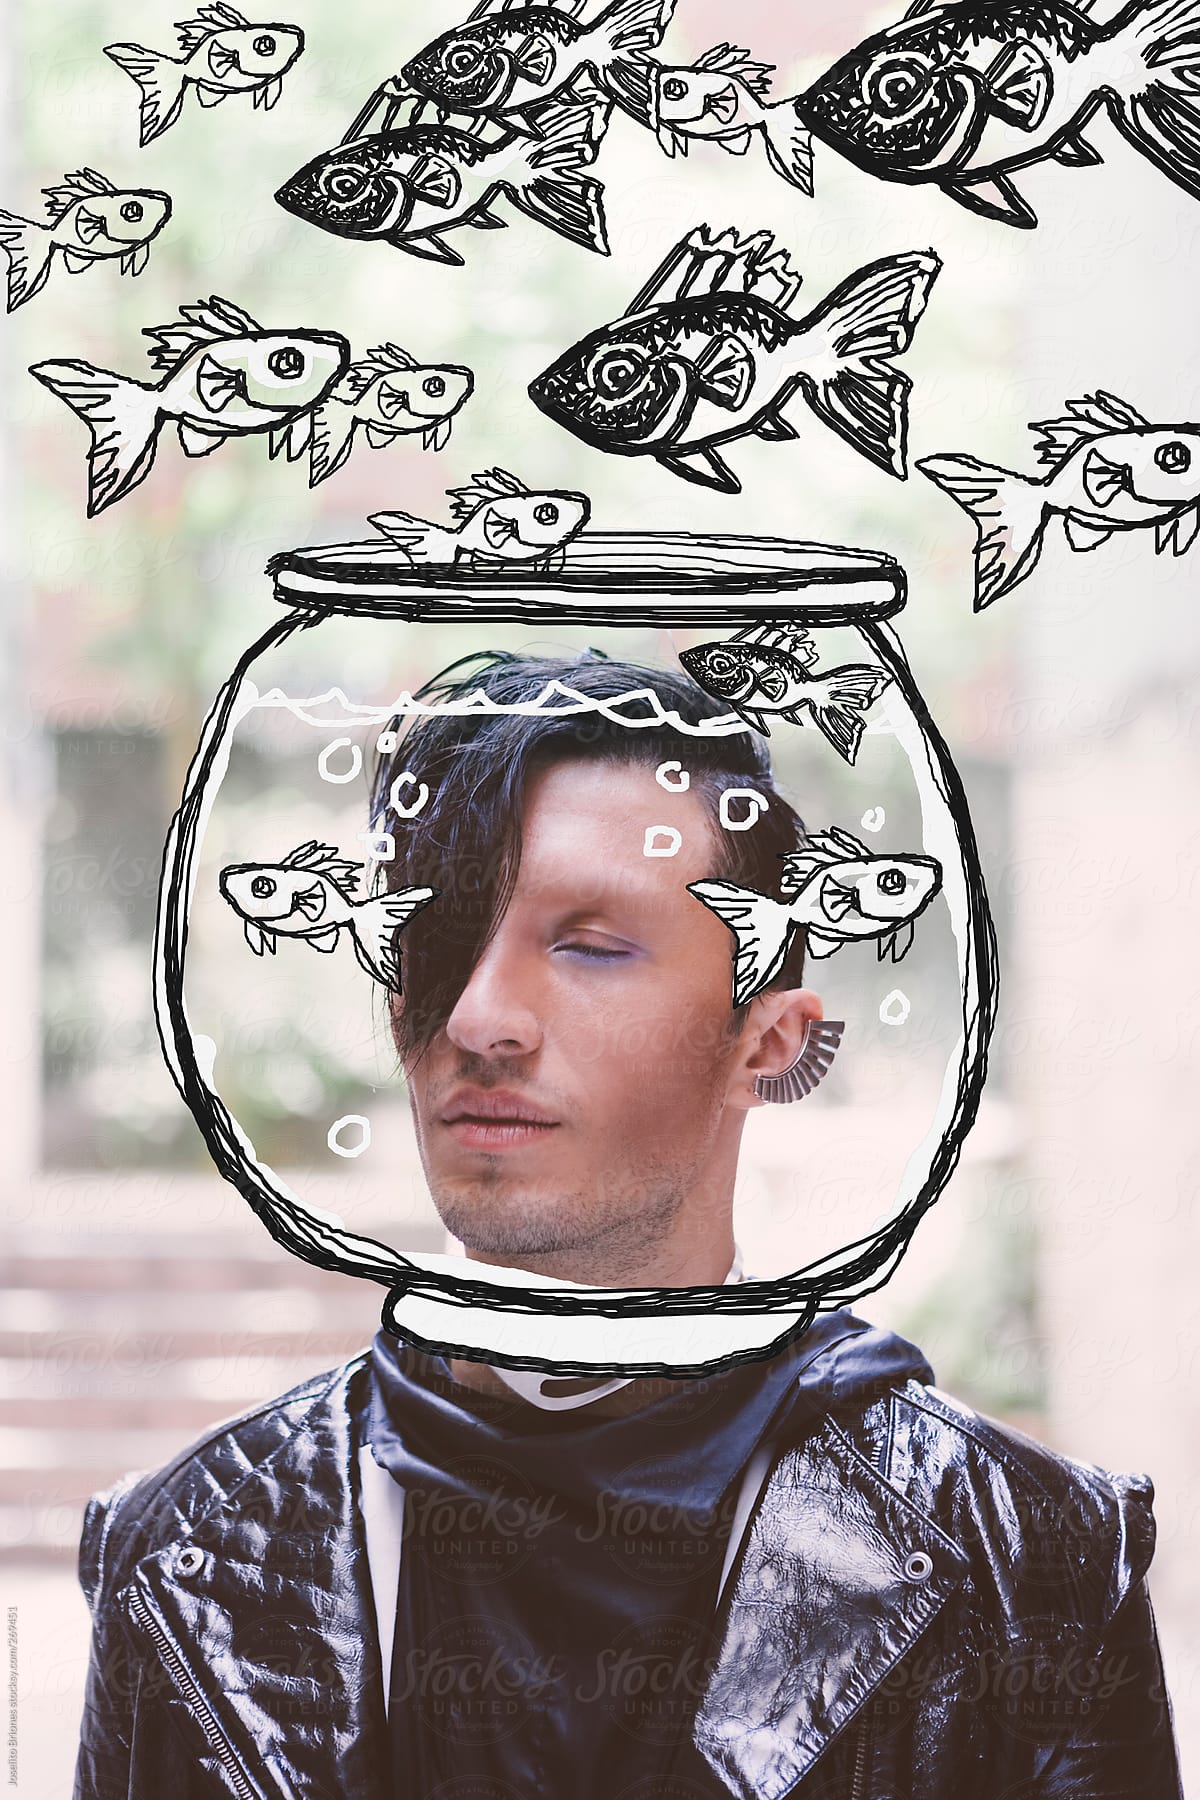 Portrait of Futuristic Man with Childish Drawing of Fishbowl as Space Helmet